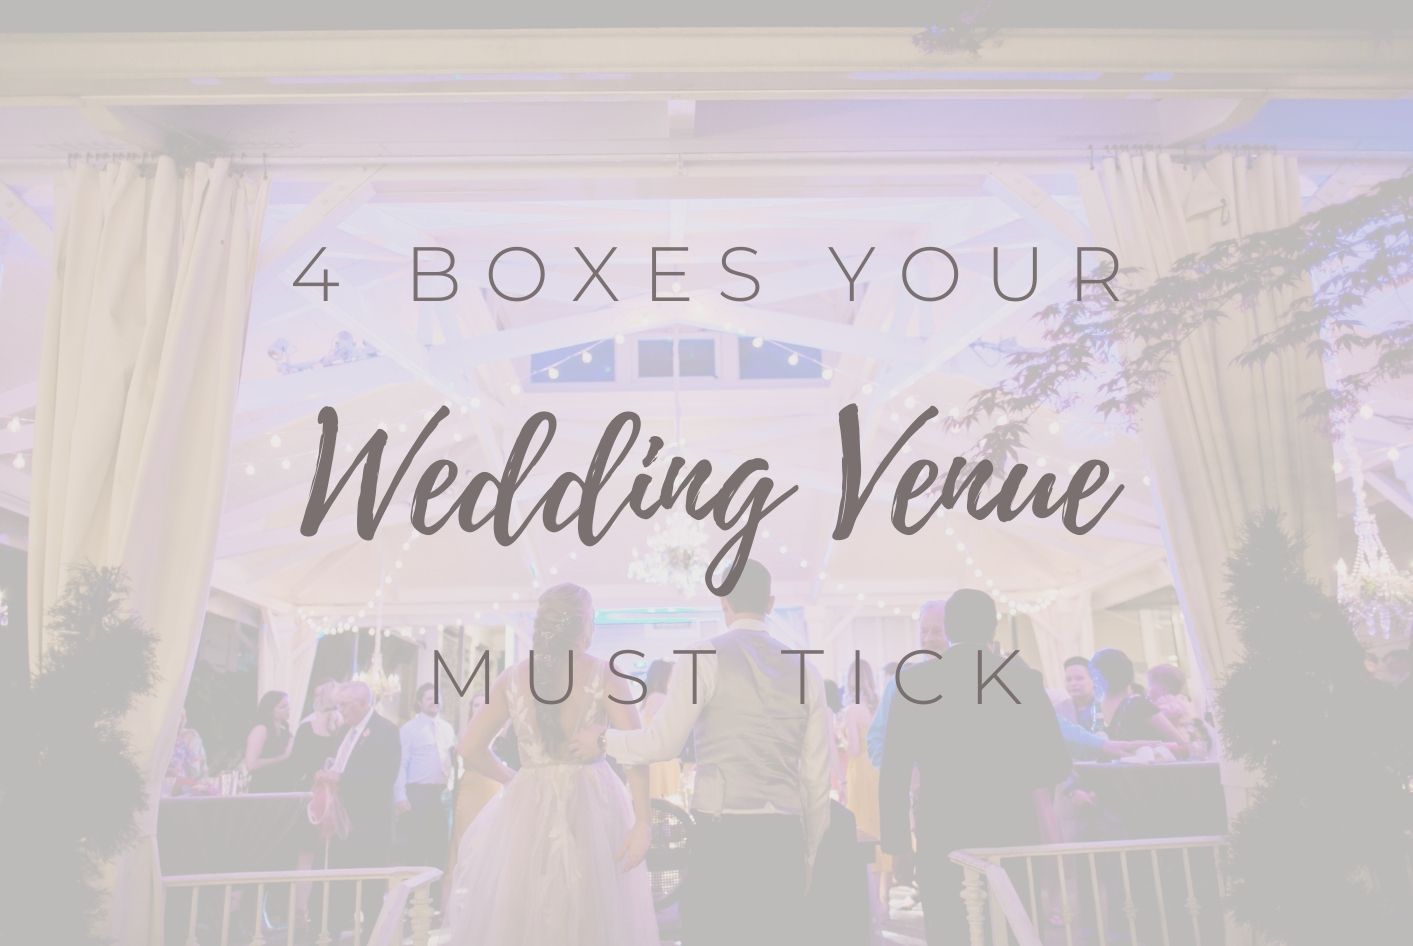 The 4 Boxes Your Wedding Venue Must Tick